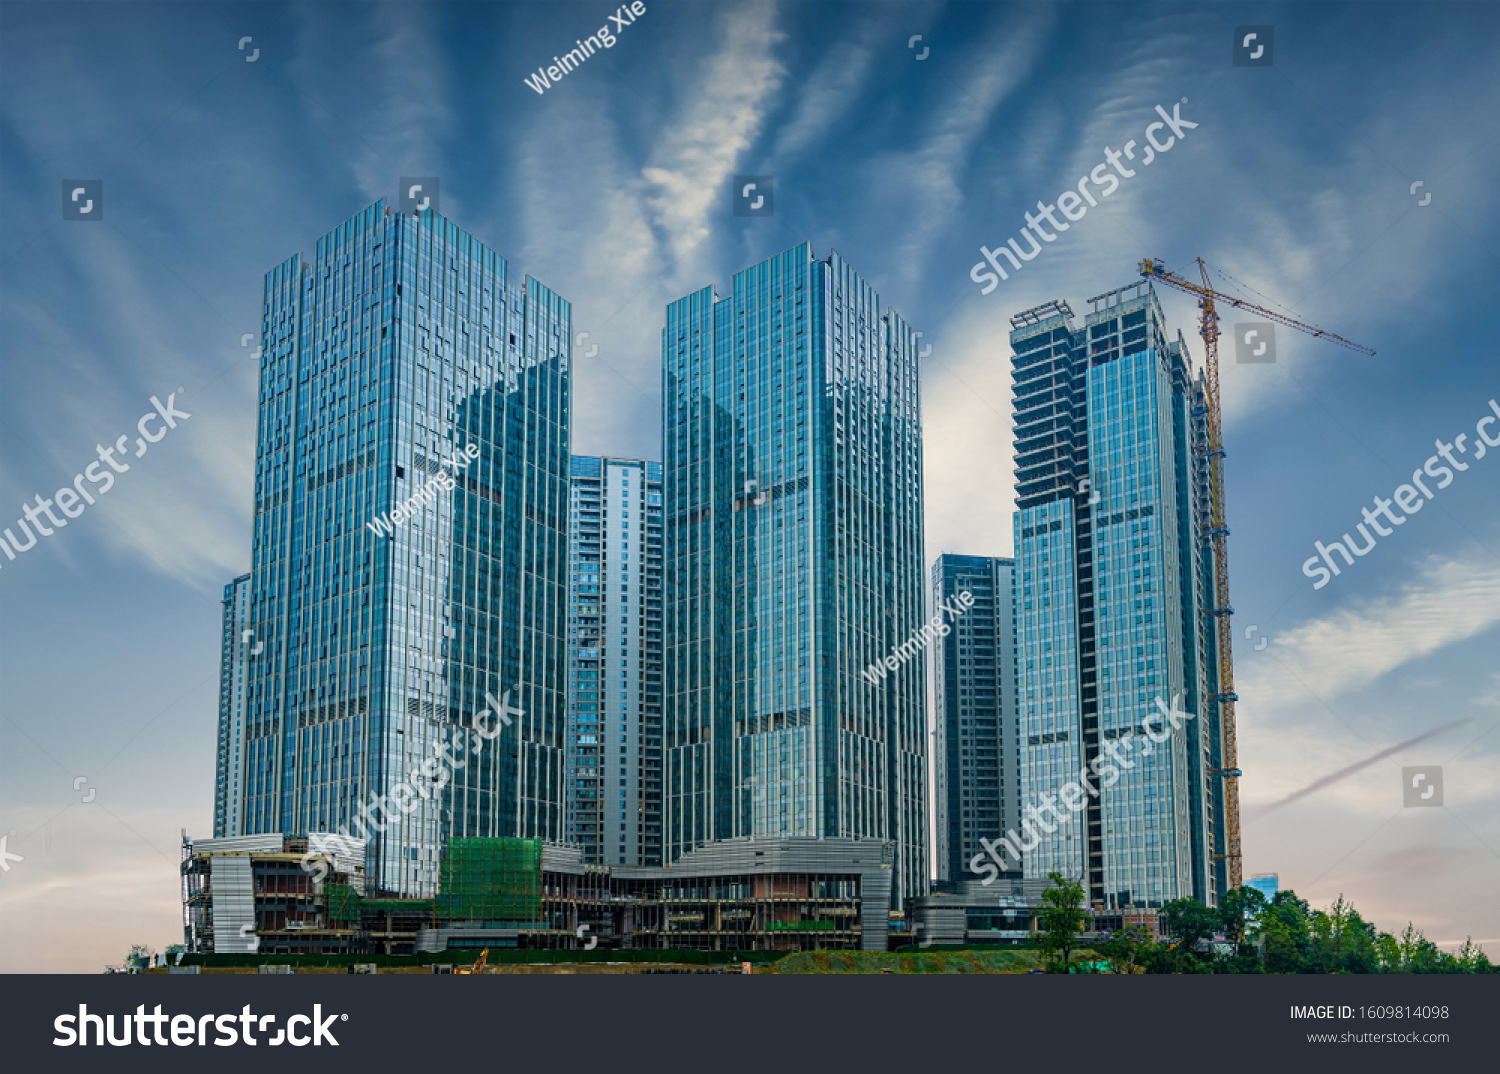 Commercial buildings and real estate developments in chengdu, sichuan province, China #1609814098